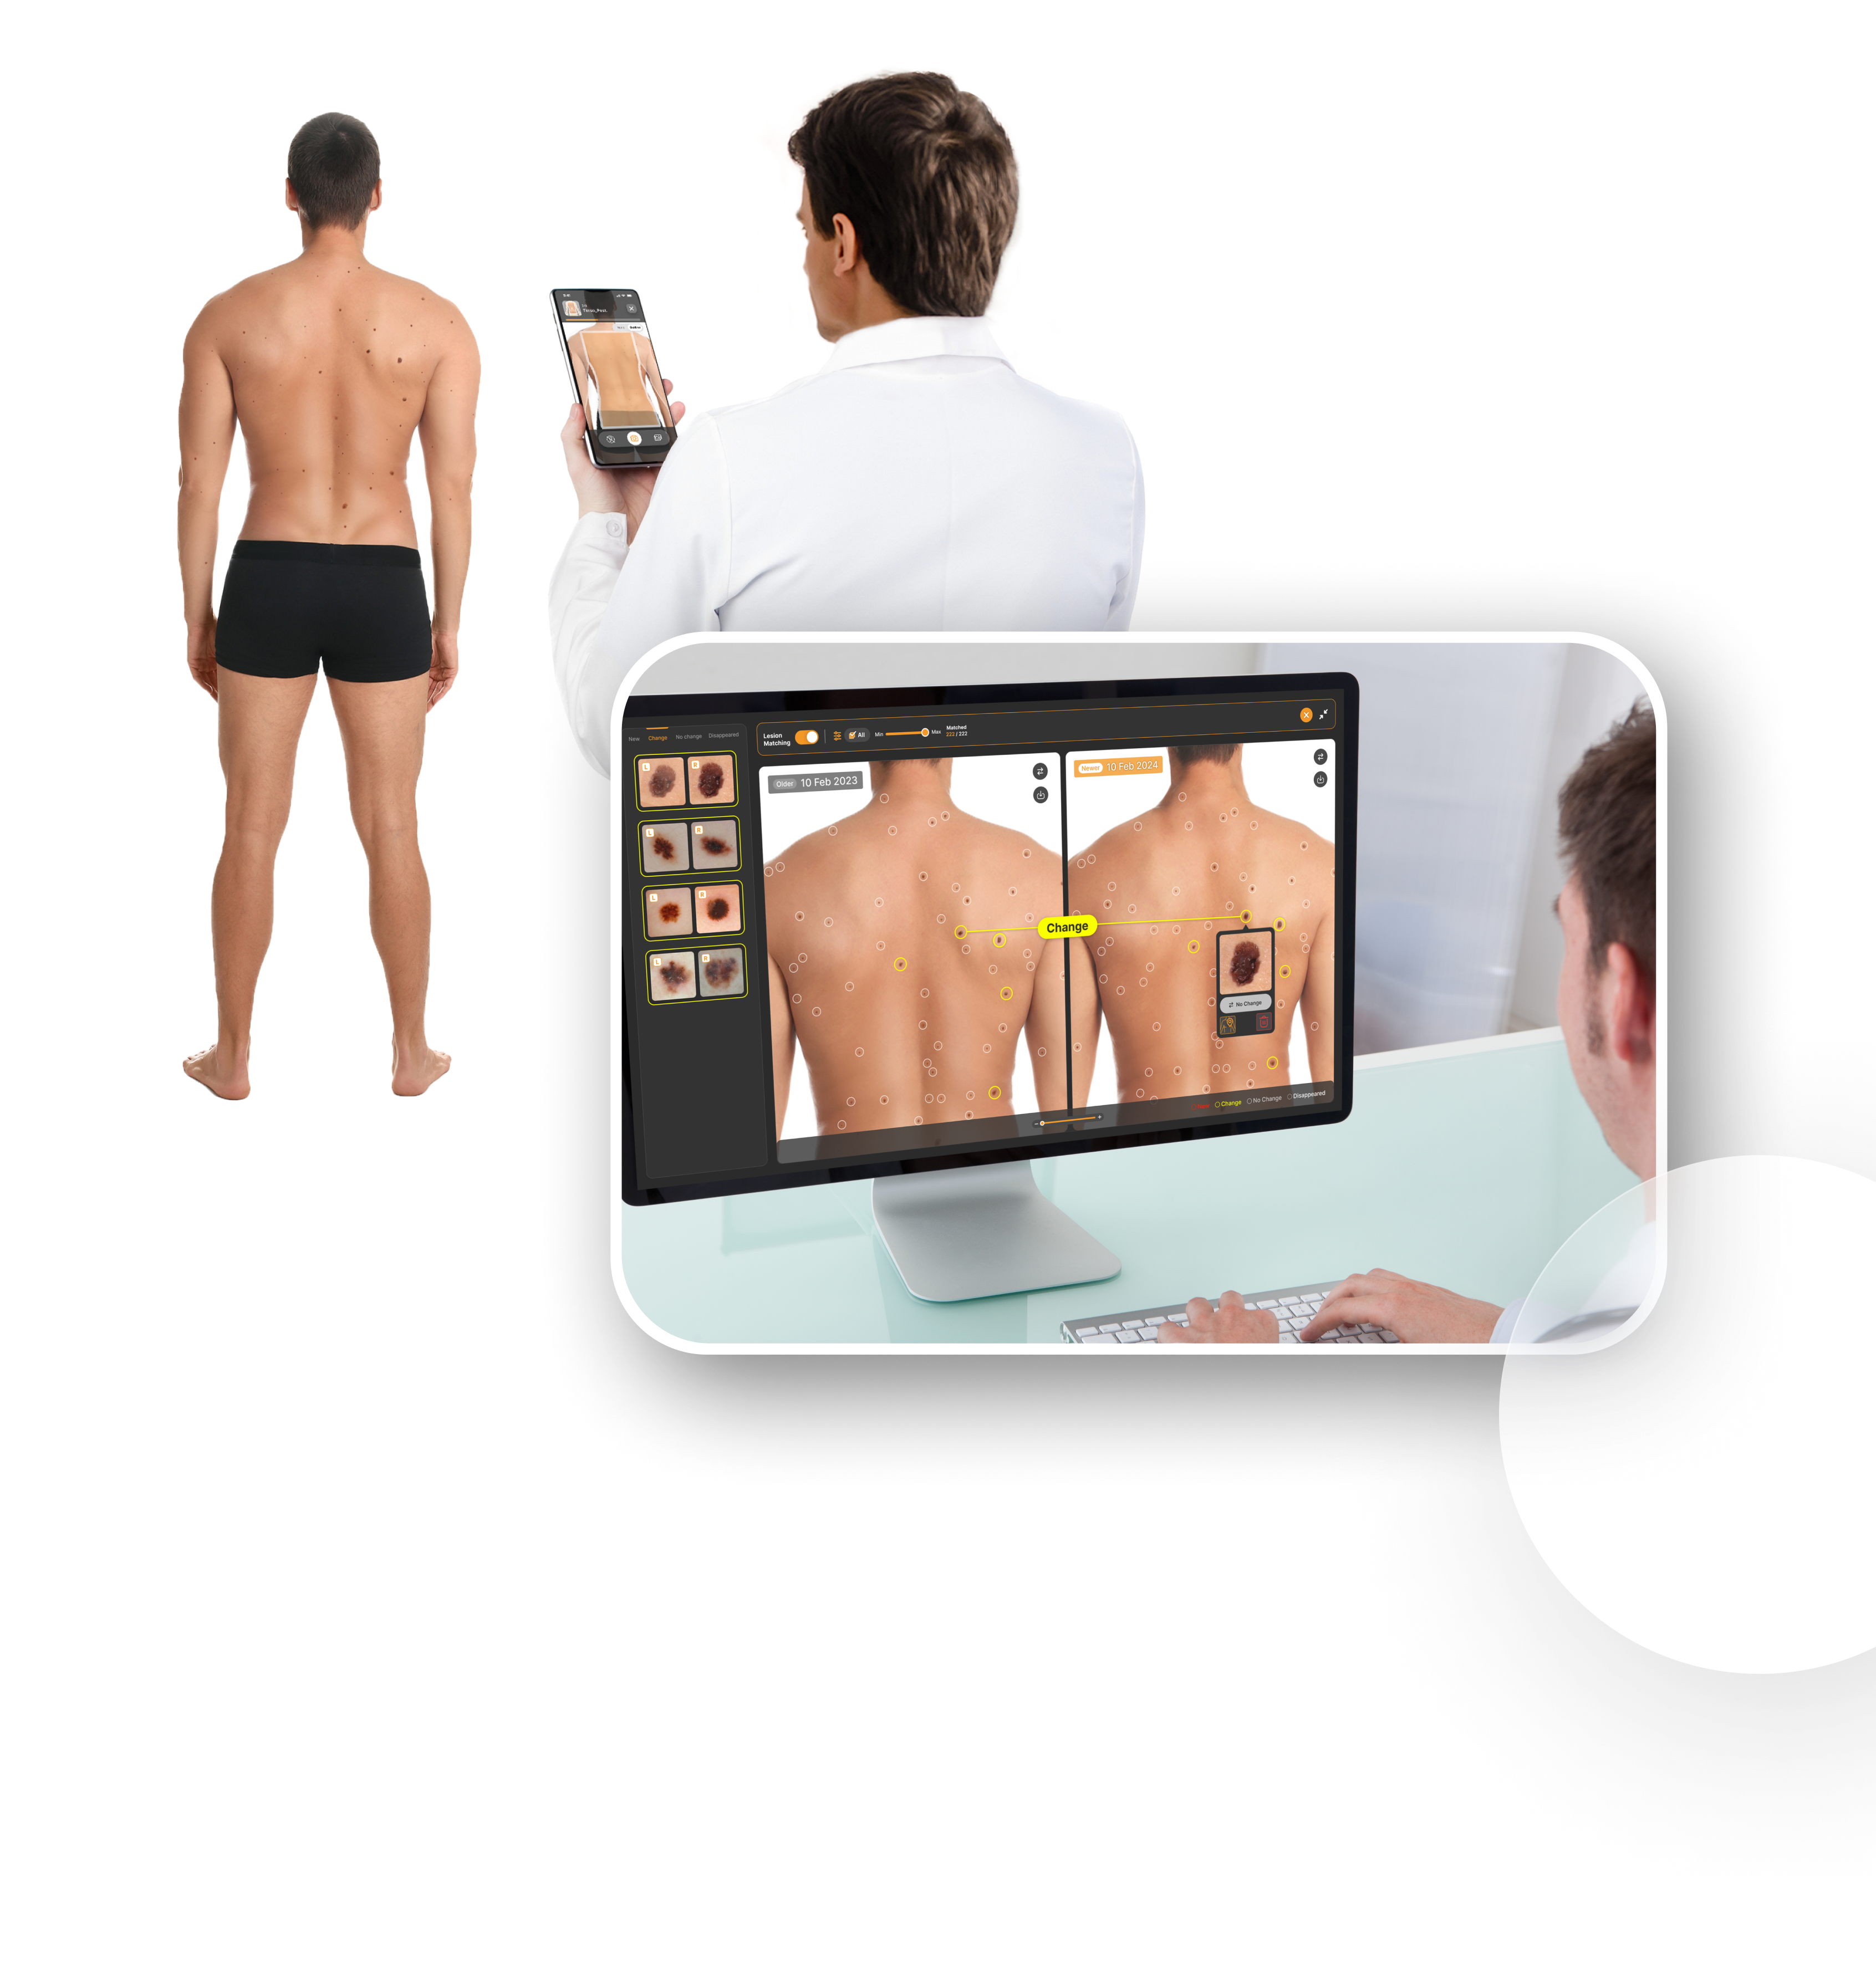 TBP analysis screen that captures total body photography images using a smartphone and analyzes changes in dots by comparing them to past images